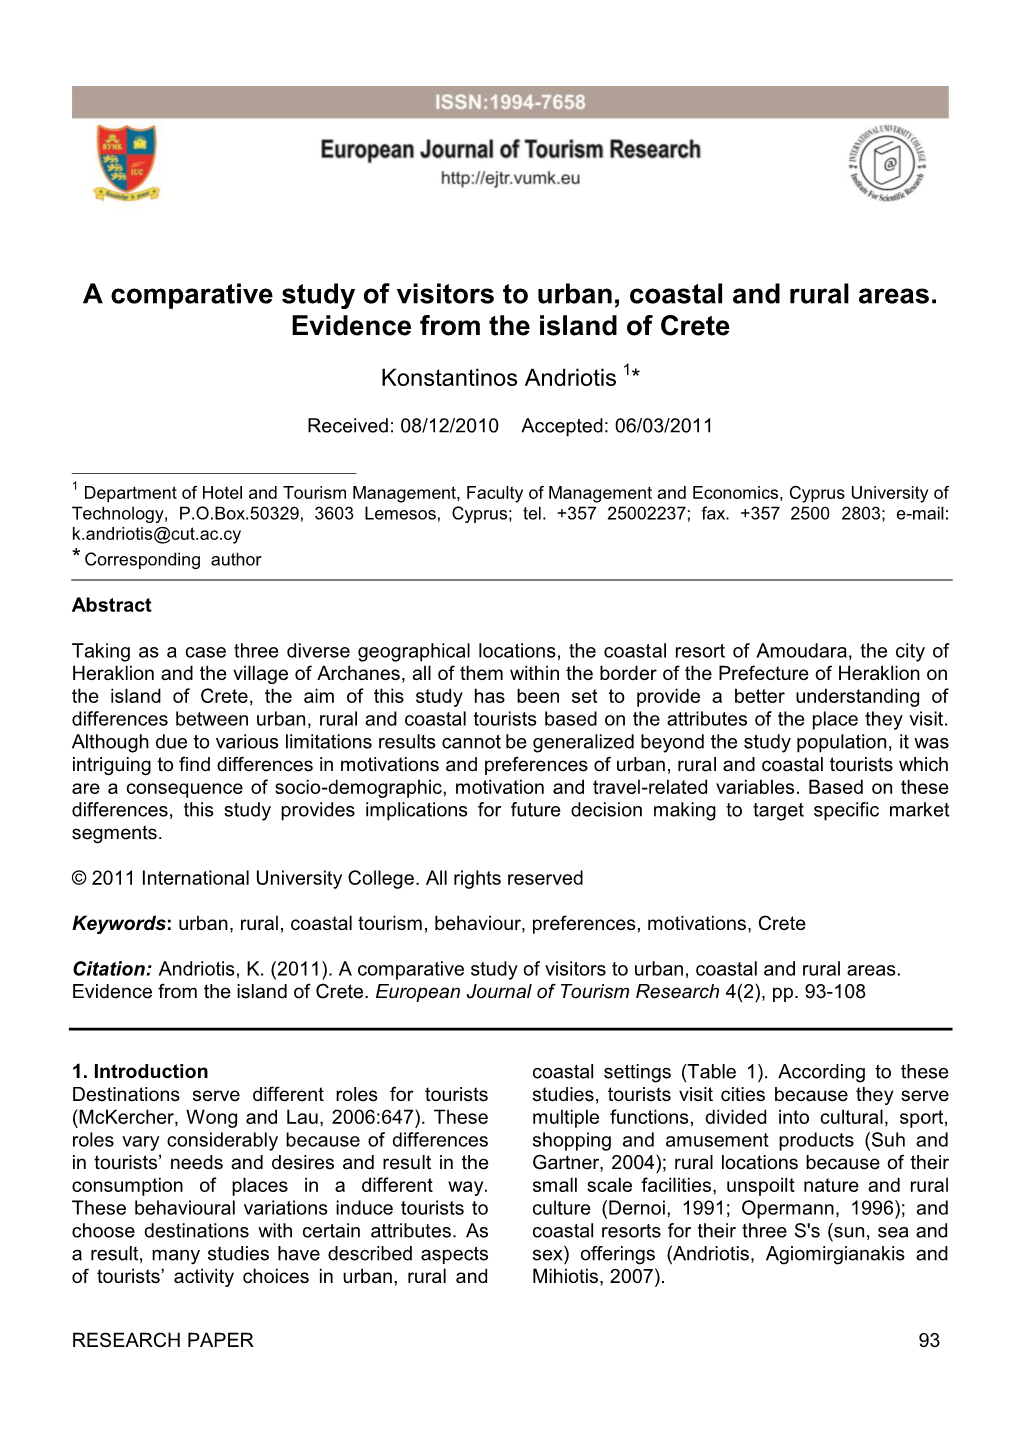 A Comparative Study of Visitors to Urban, Coastal and Rural Areas